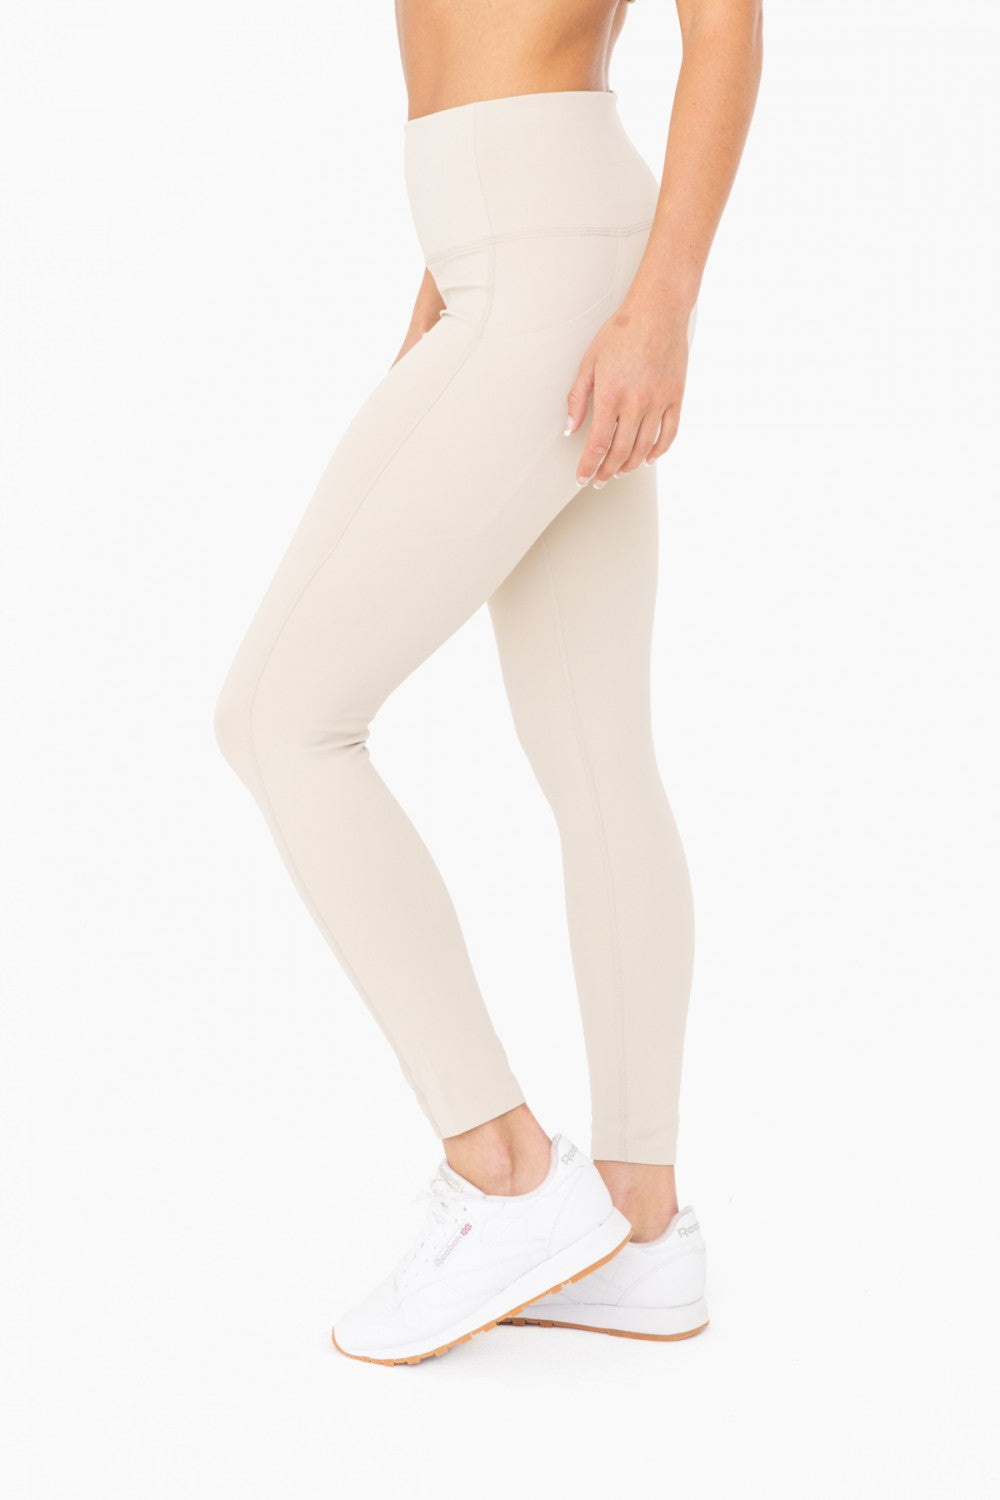 Mono B Laser-Cut and Bonded Essential Foldover Highwaist Leggings - Bo –  The Outdoor Store Shop